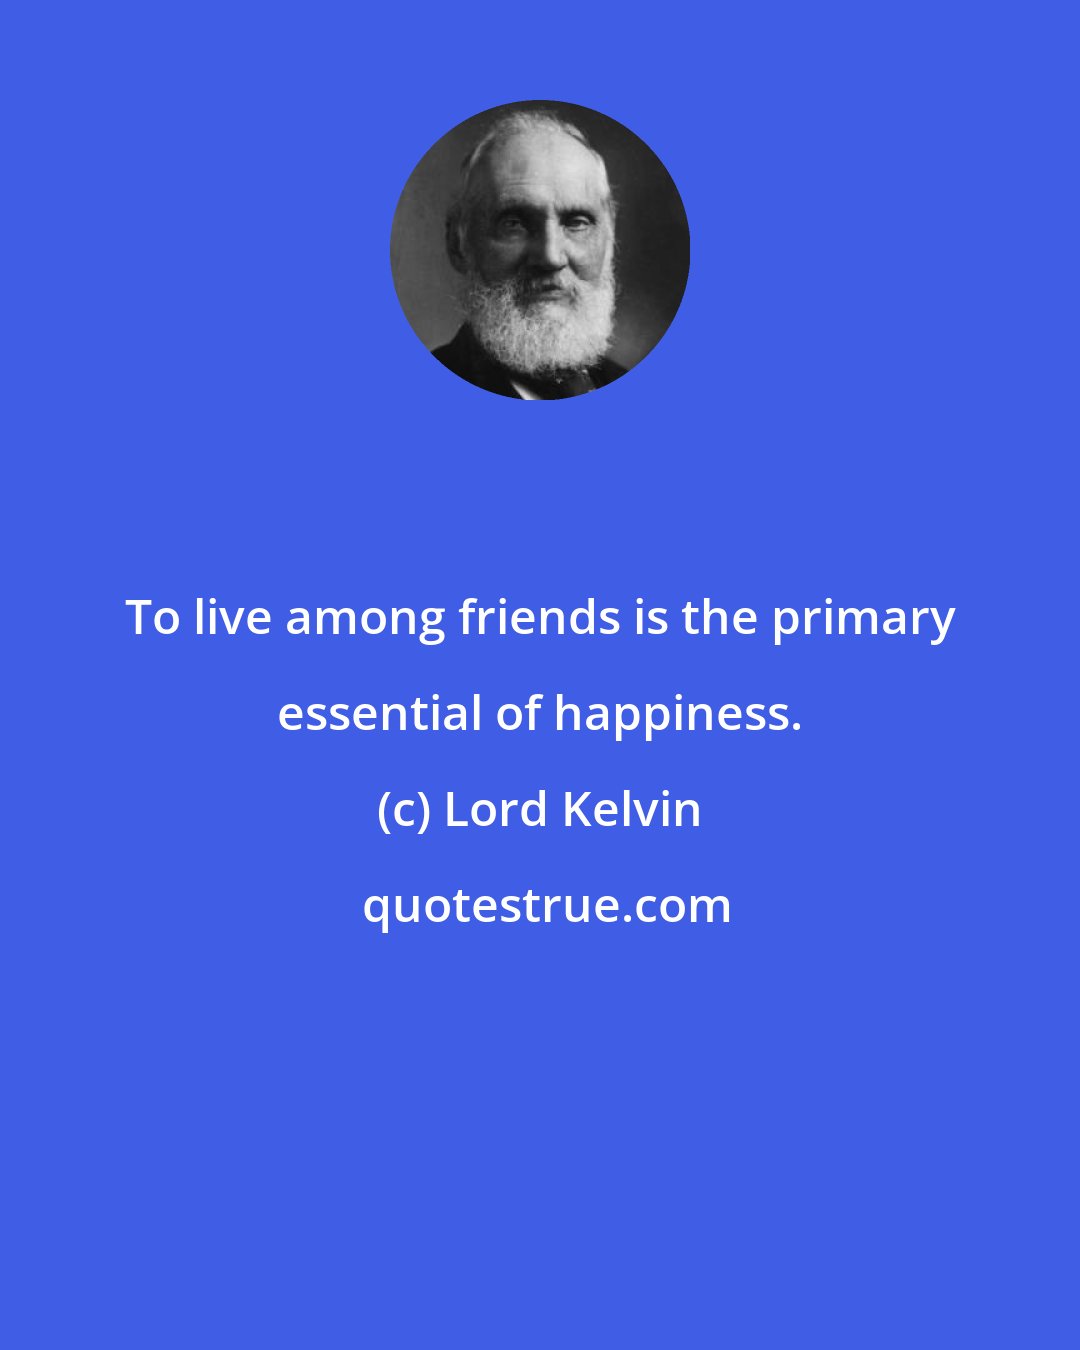 Lord Kelvin: To live among friends is the primary essential of happiness.